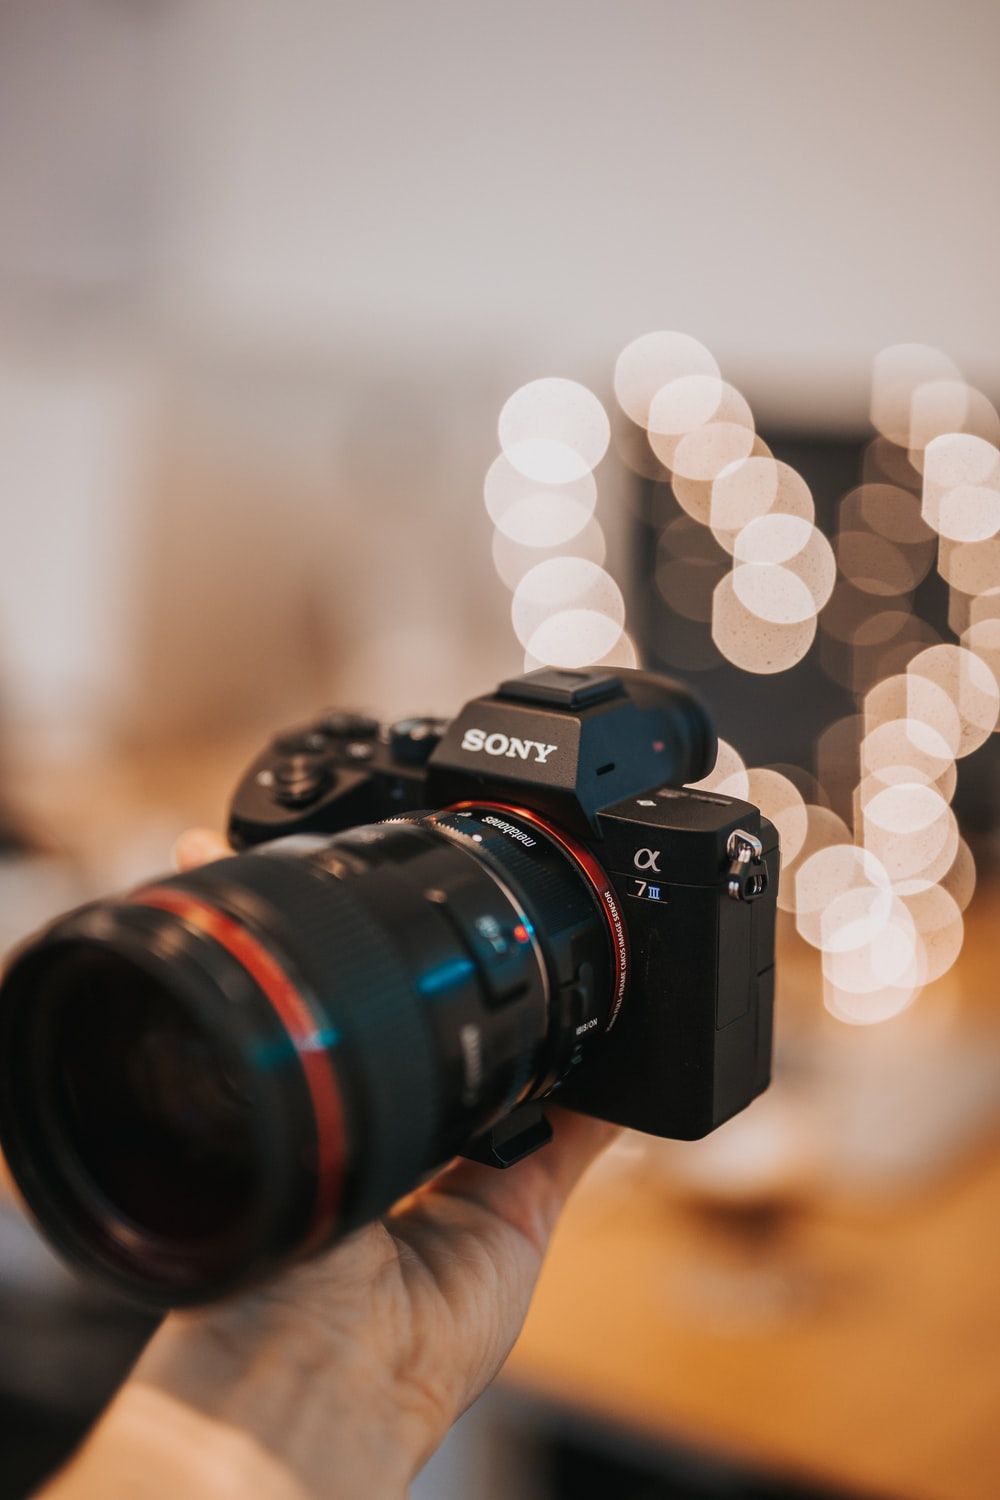 Sony Alpha A7Iii Picture [HD]. Download Free Image